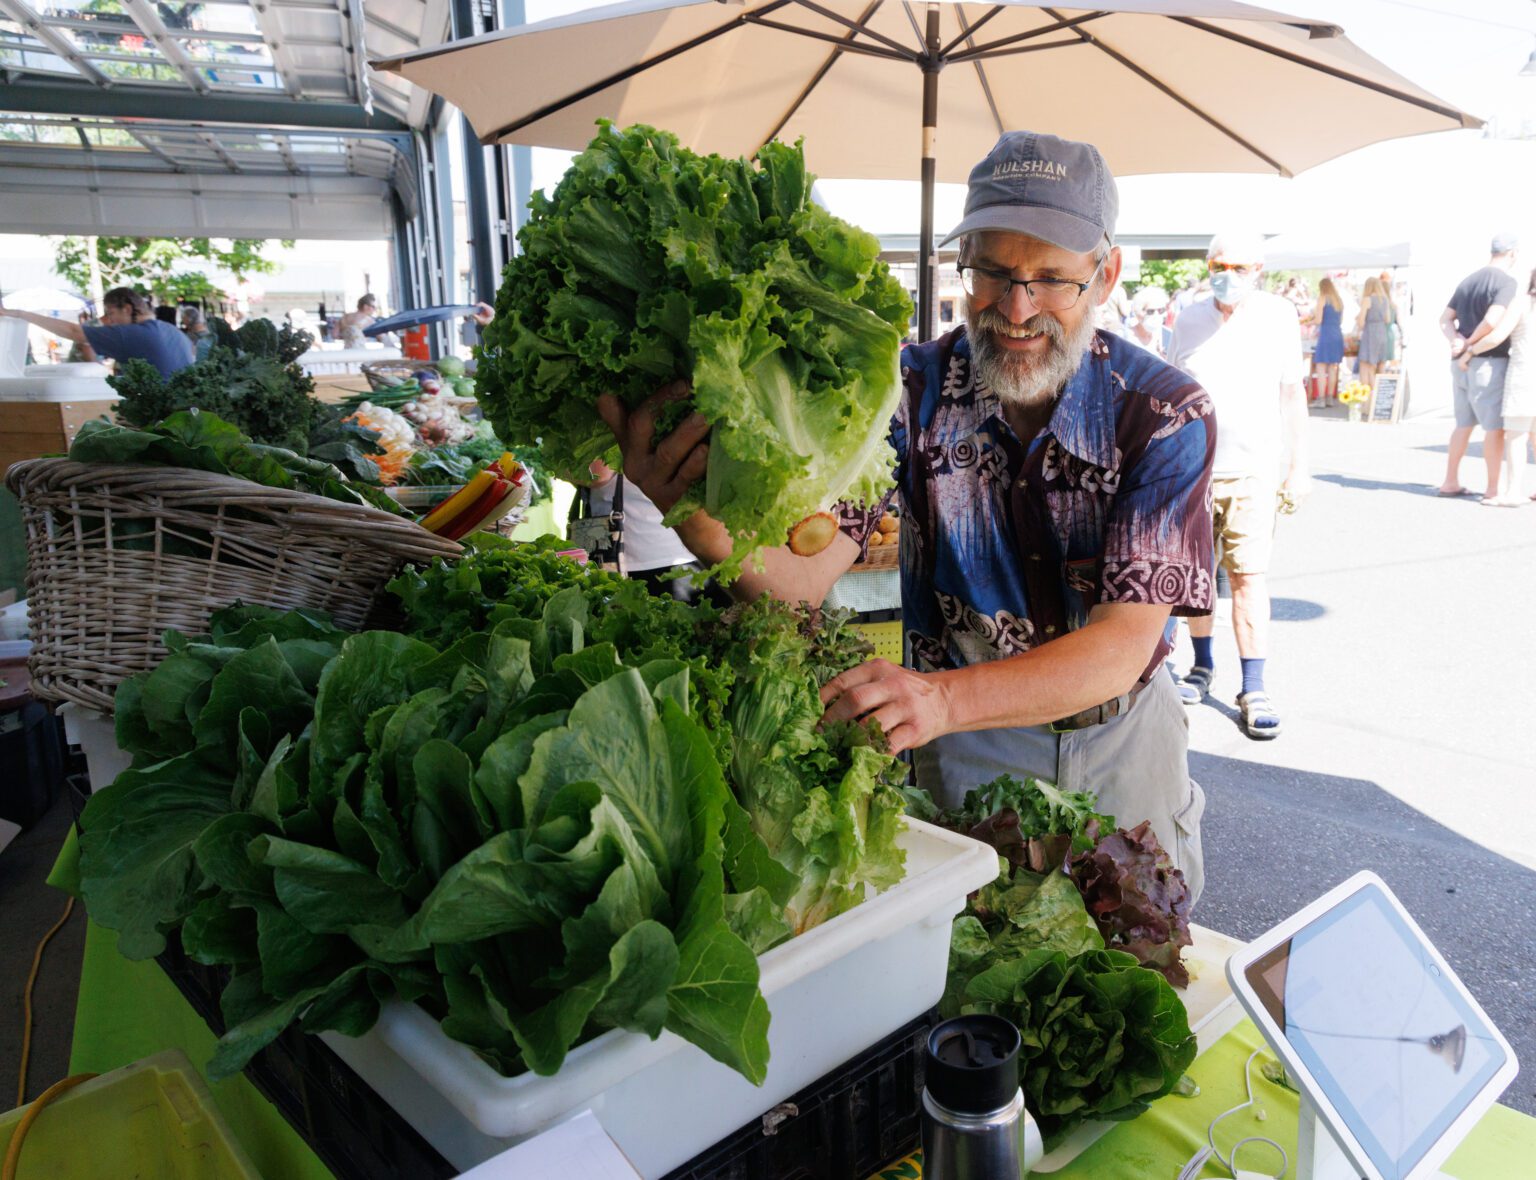 Cedarville Farms’ Mike Finger stocks more leaf lettuce in his booth at the Bellingham Farmers Market on July 30